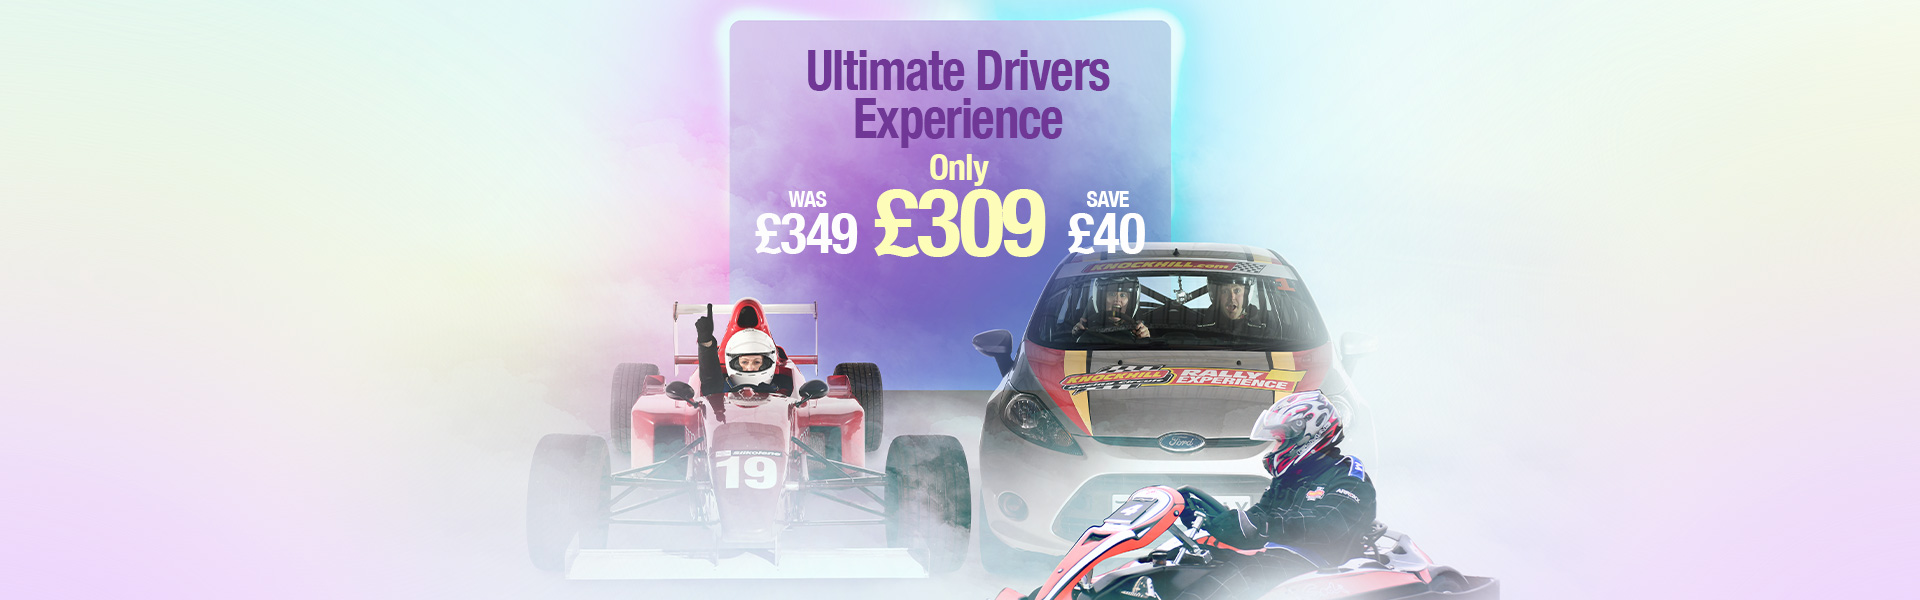 Ultimate Drivers Experience